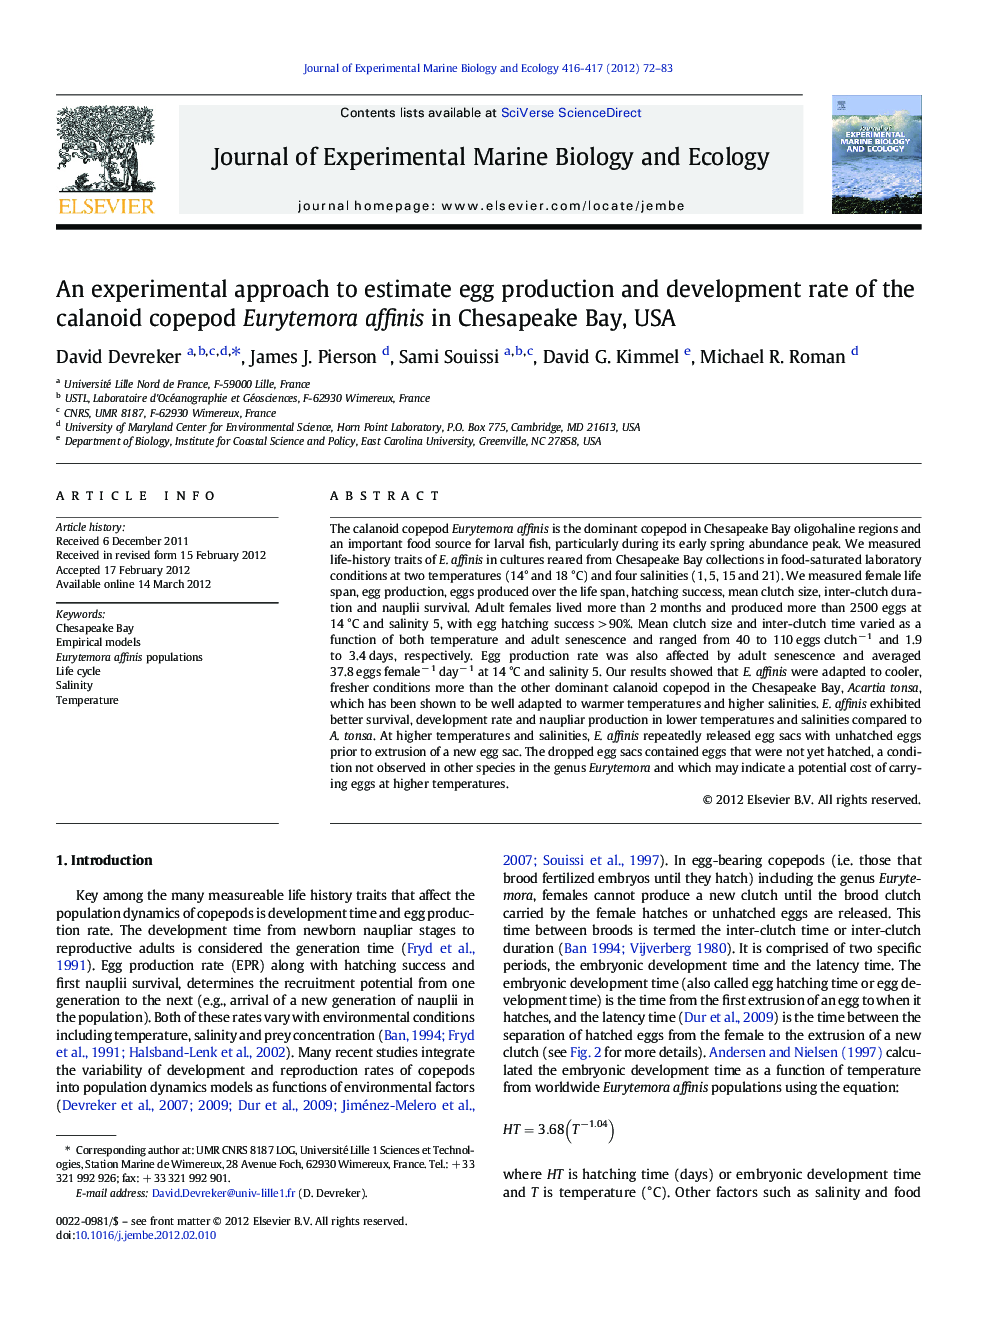 An experimental approach to estimate egg production and development rate of the calanoid copepod Eurytemora affinis in Chesapeake Bay, USA